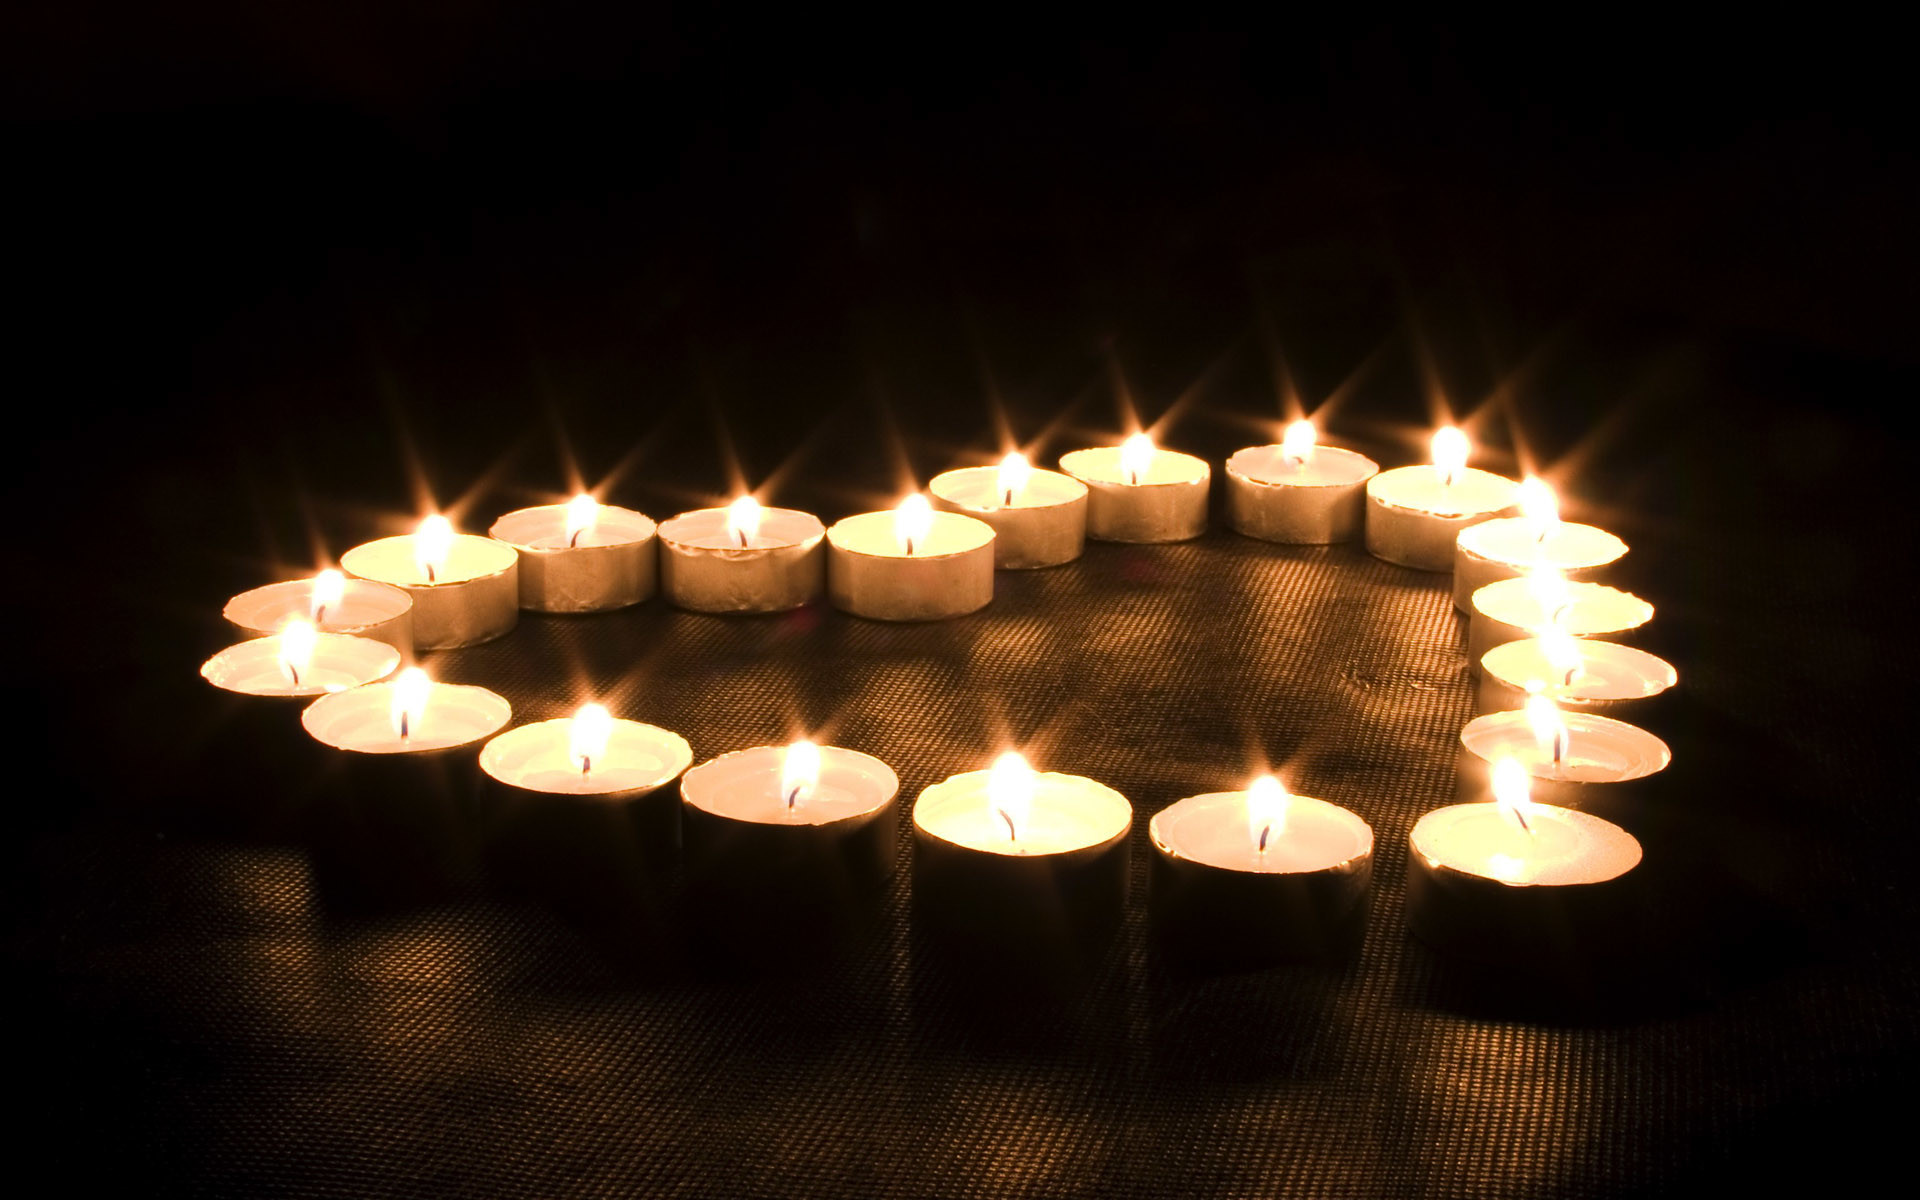 Beautiful Heart Of Candles - Rest In Peace Profile - 1920x1200 Wallpaper -  